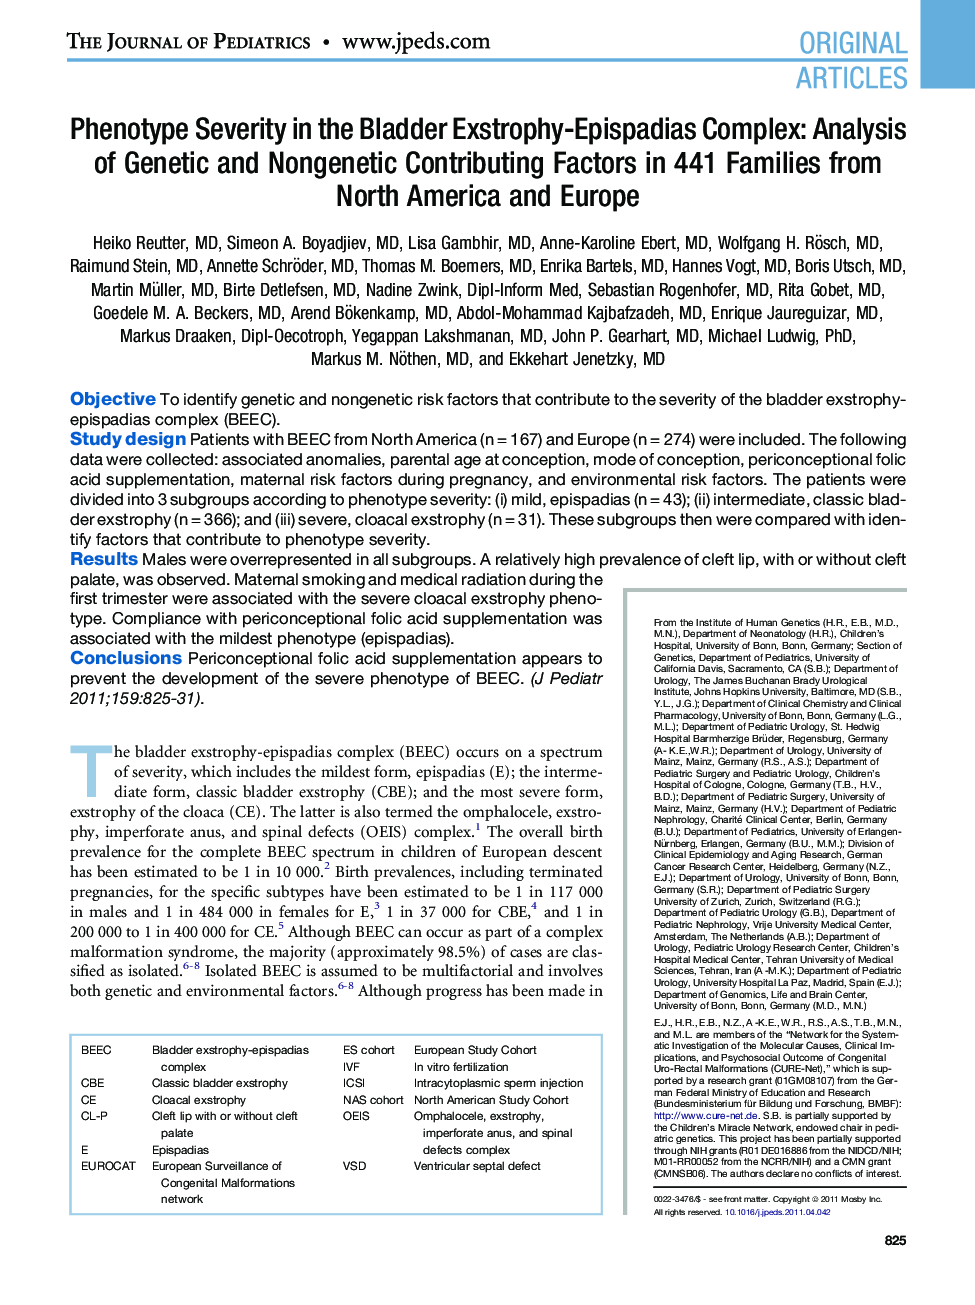 Phenotype Severity in the Bladder Exstrophy-Epispadias Complex: Analysis of Genetic and Nongenetic Contributing Factors in 441 Families from North America and Europe